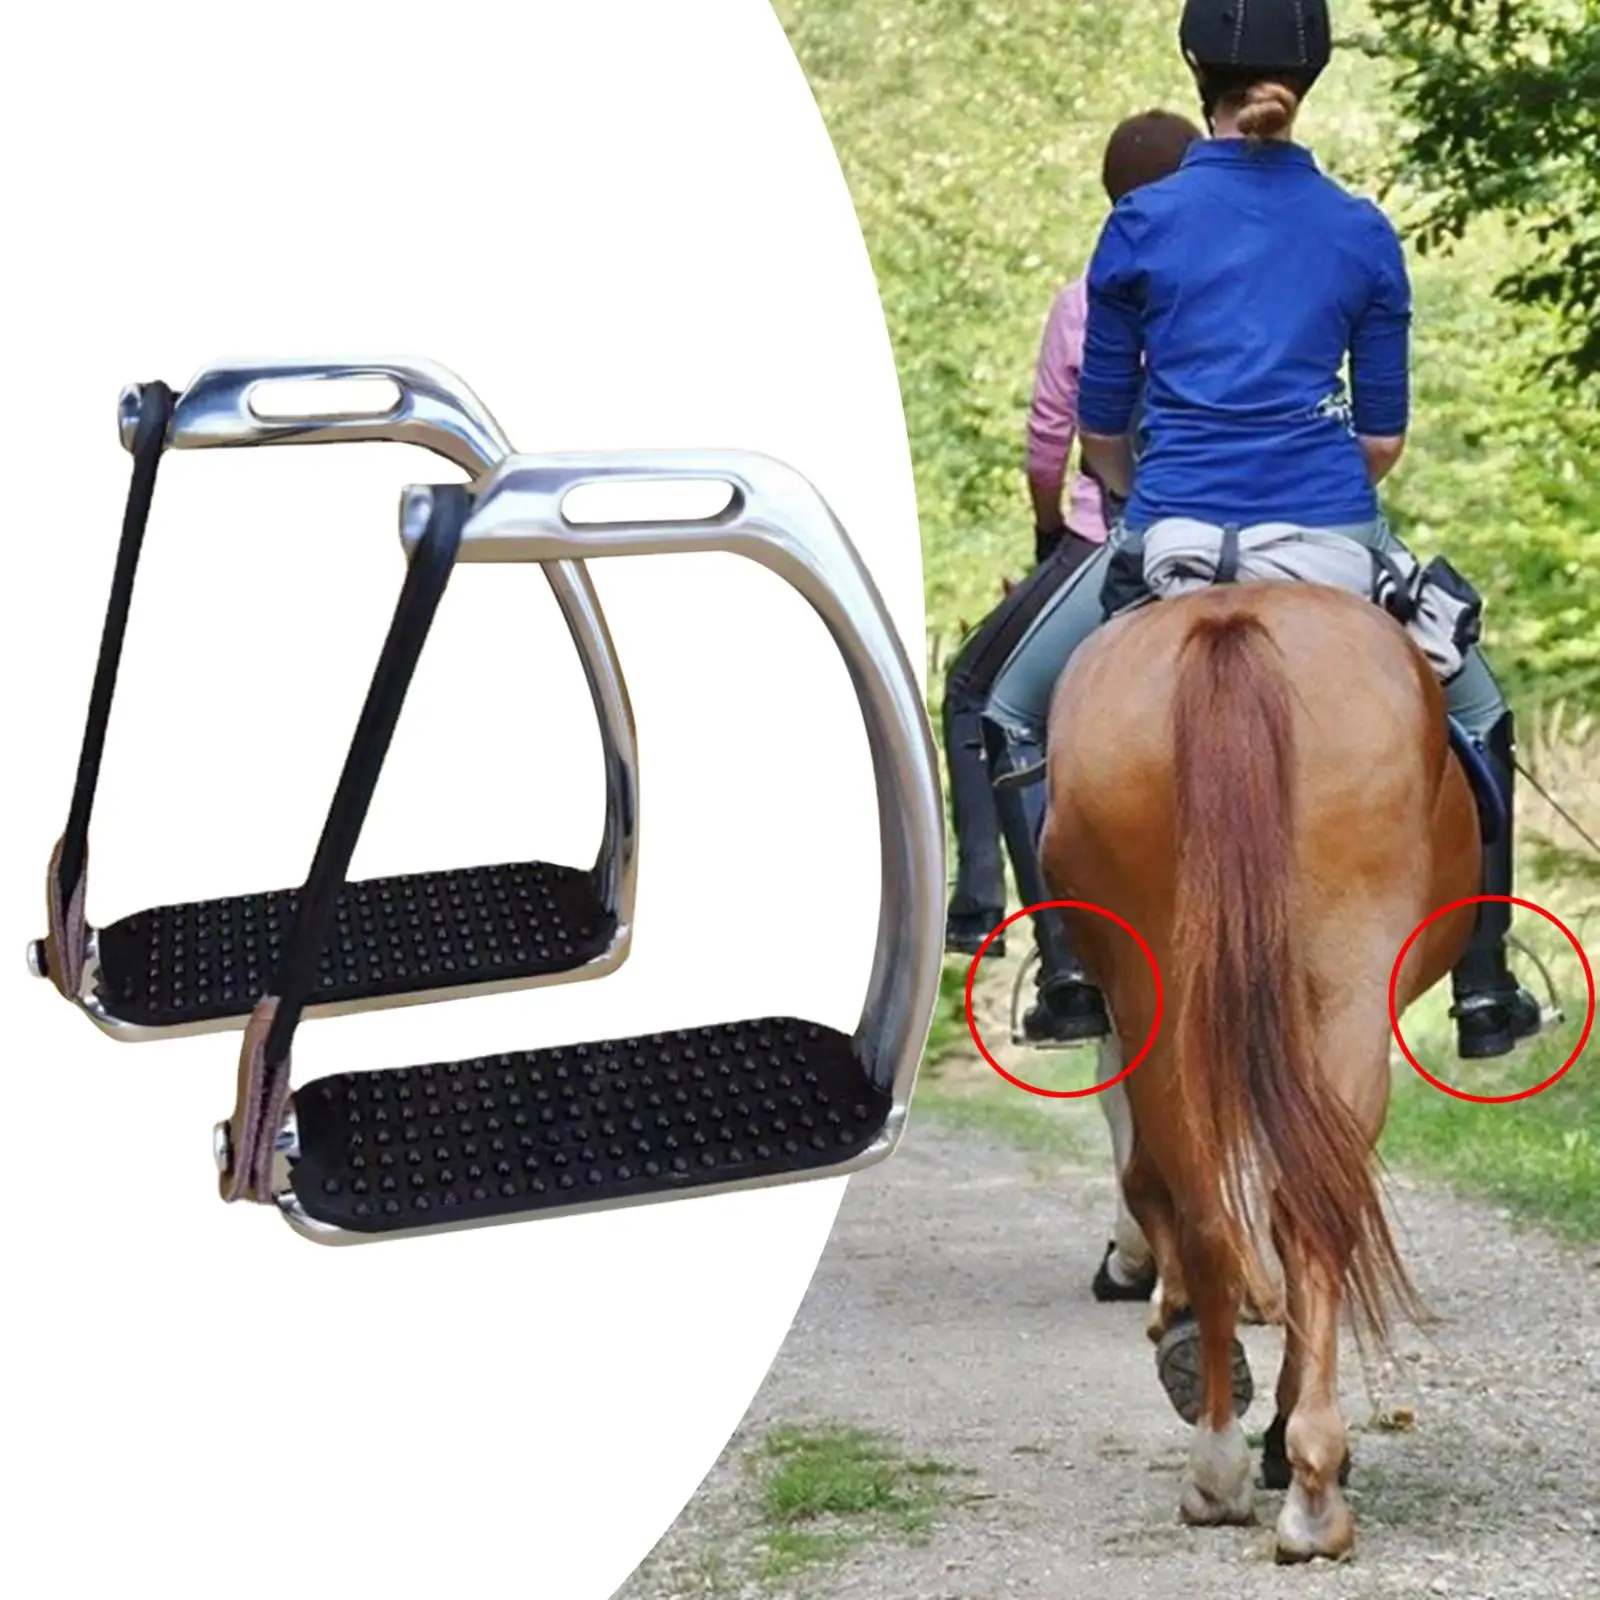 Horse Riding Stirrups Lightweight Stainless Steel Non Slip with Rubber Pad 2x for Racing Western Riding Outdoor Accessories Kids